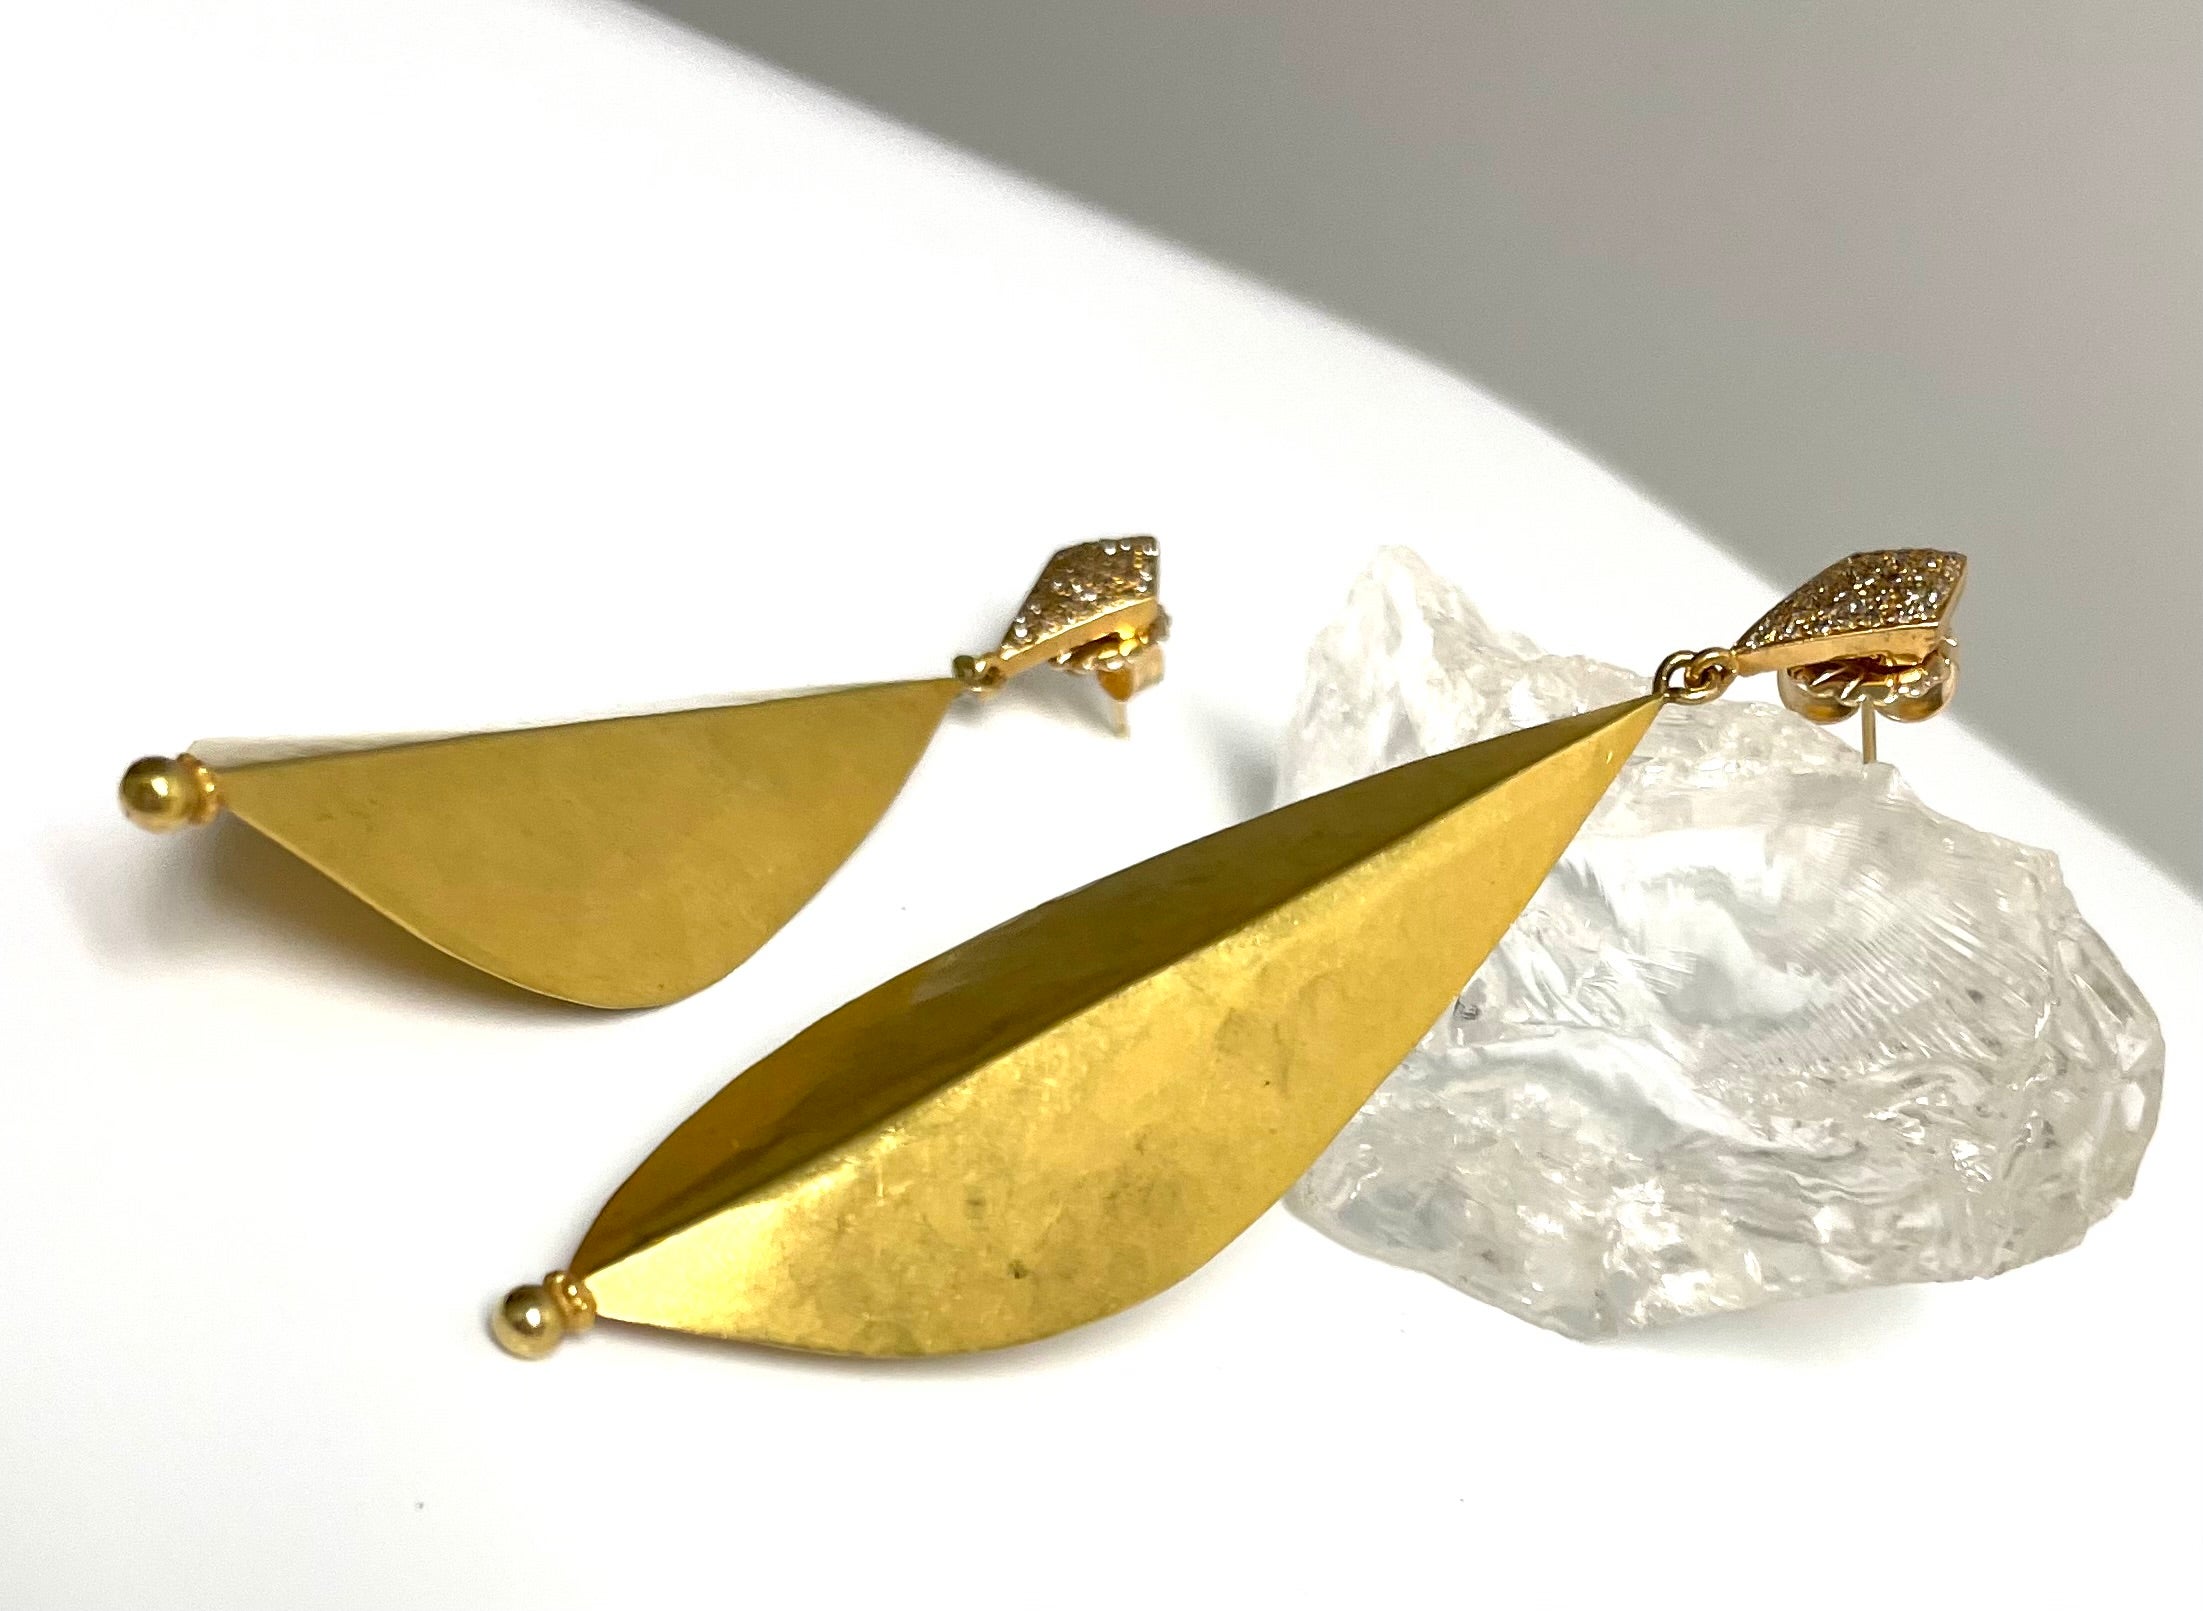 Description
The beauty of these earrings lies in the fusion of the classic pave diamond studs contrasted with the modern delicately hammered semi-matte finish leaves. 
Item # E3320

Materials and Weight
18k yellow gold
Pave diamond vermeil studs
14k